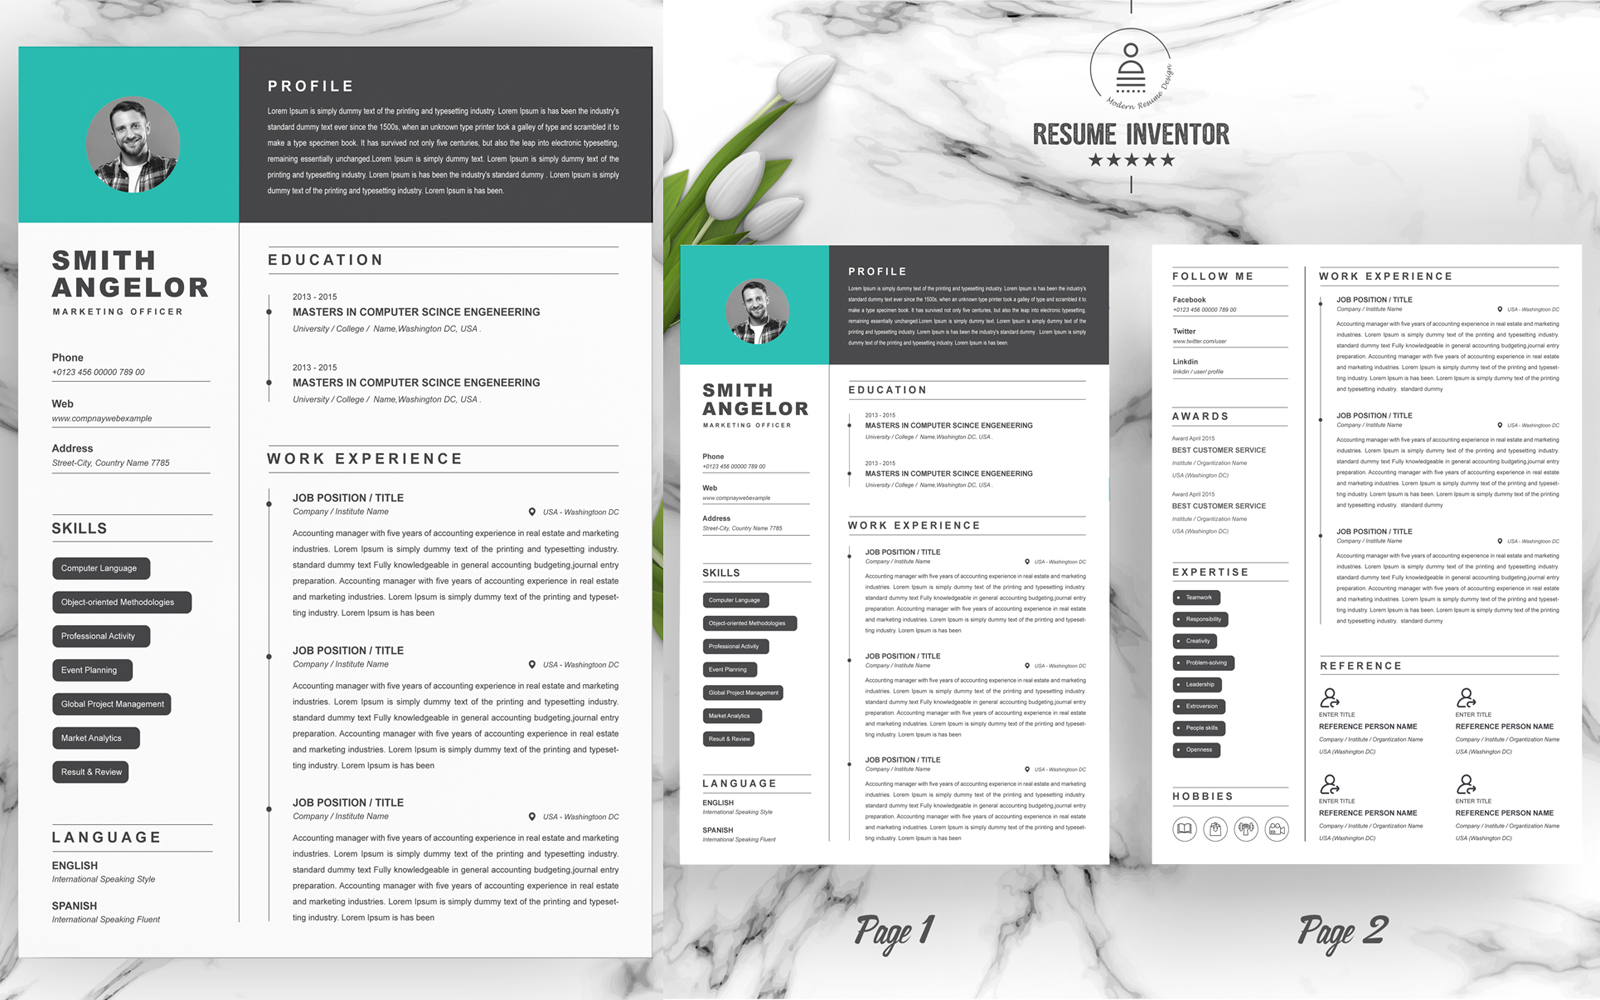 Smith / Professional Resume Template